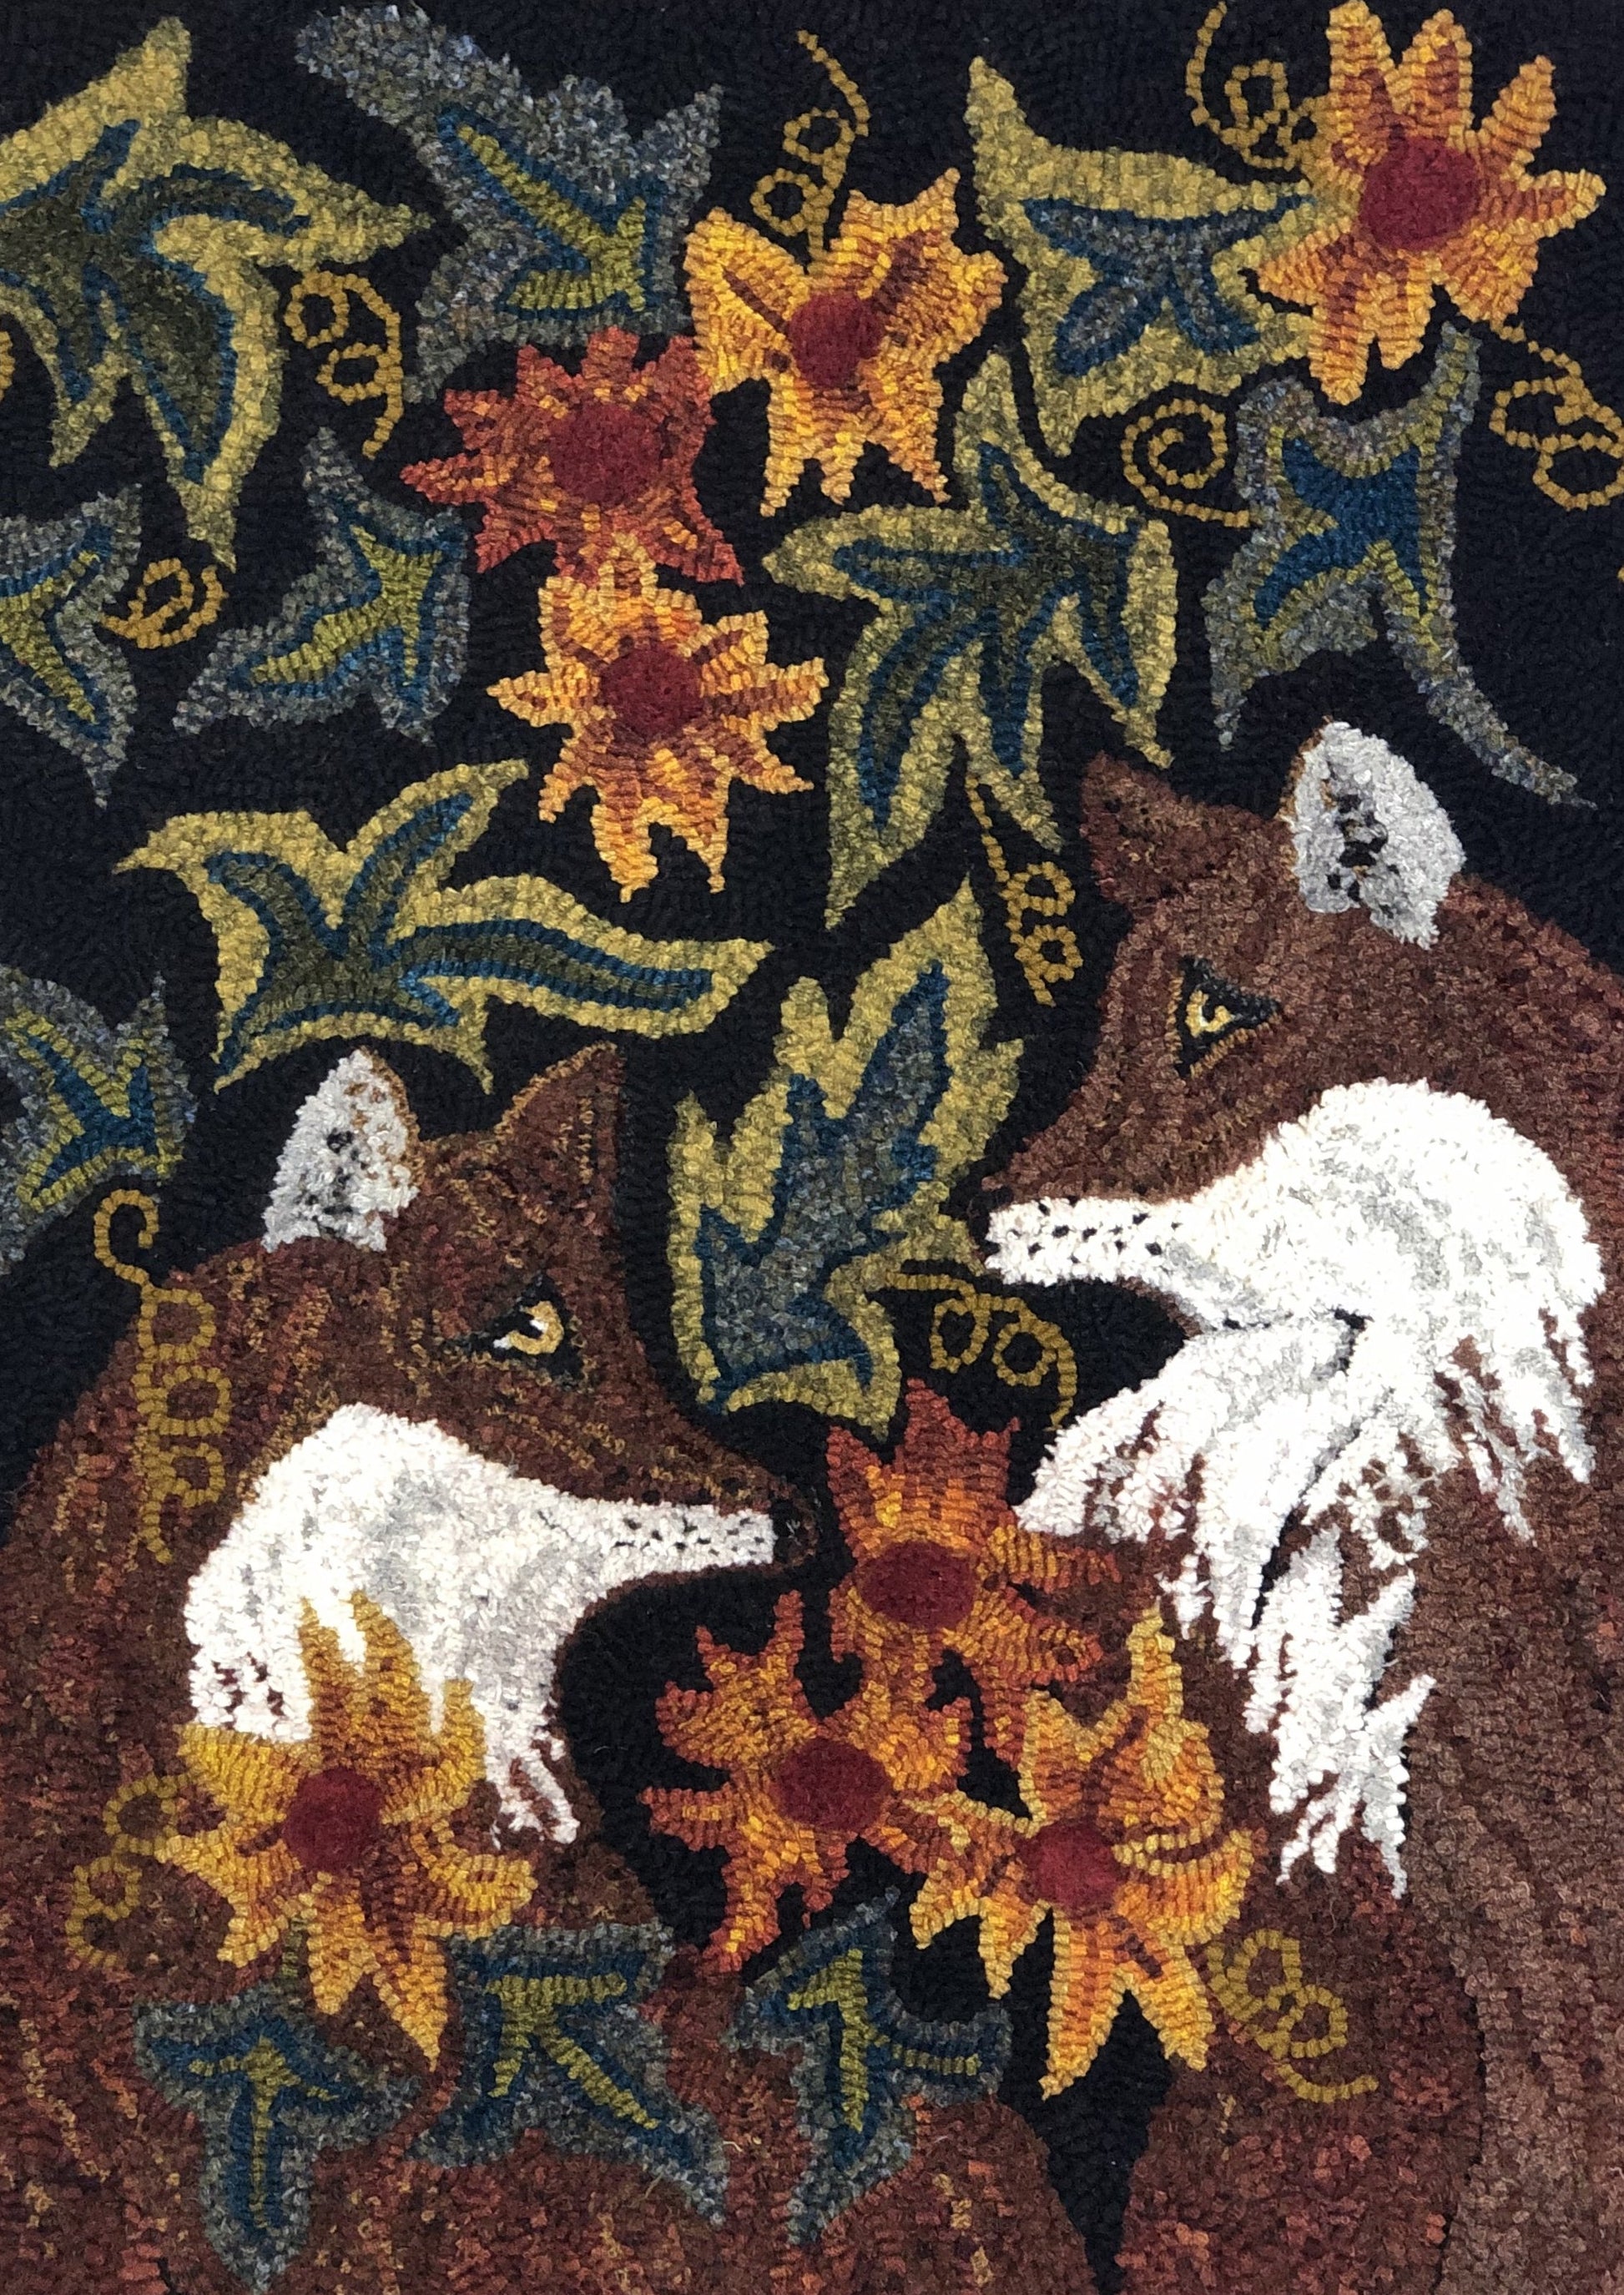 Together- Rug Hooking /Rug Punch Needle Paper Pattern by Orphaned Wool. This is a sweet fox pattern for anyone that enjoy the wildlife of foxes.. Two foxes are lovingly facing one another in this design. This is a paper pattern that is formatted for enlargement, which give you the option of what size pattern you would like to create. This is a great way to make this lovely Together pattern and also a very cost-effective way to create a custom size rug hooking pattern.